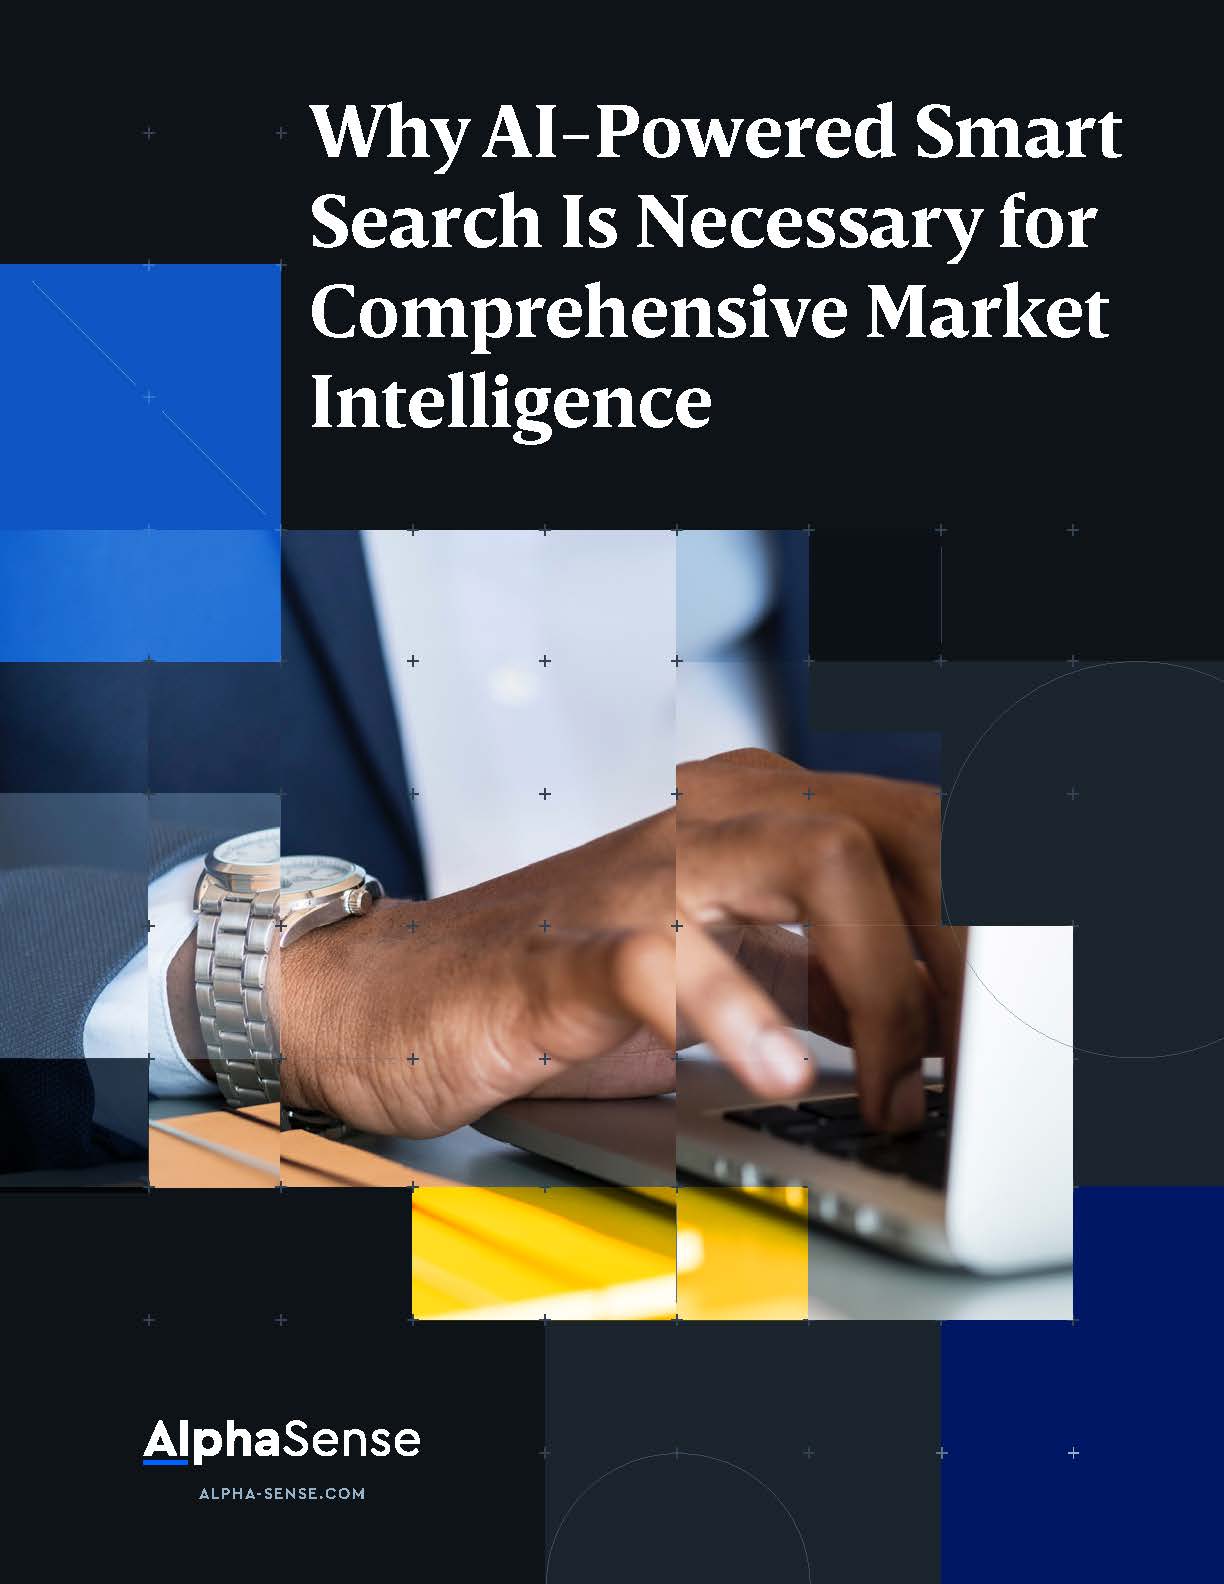 Cover of AI-Powered Smart Search White Paper